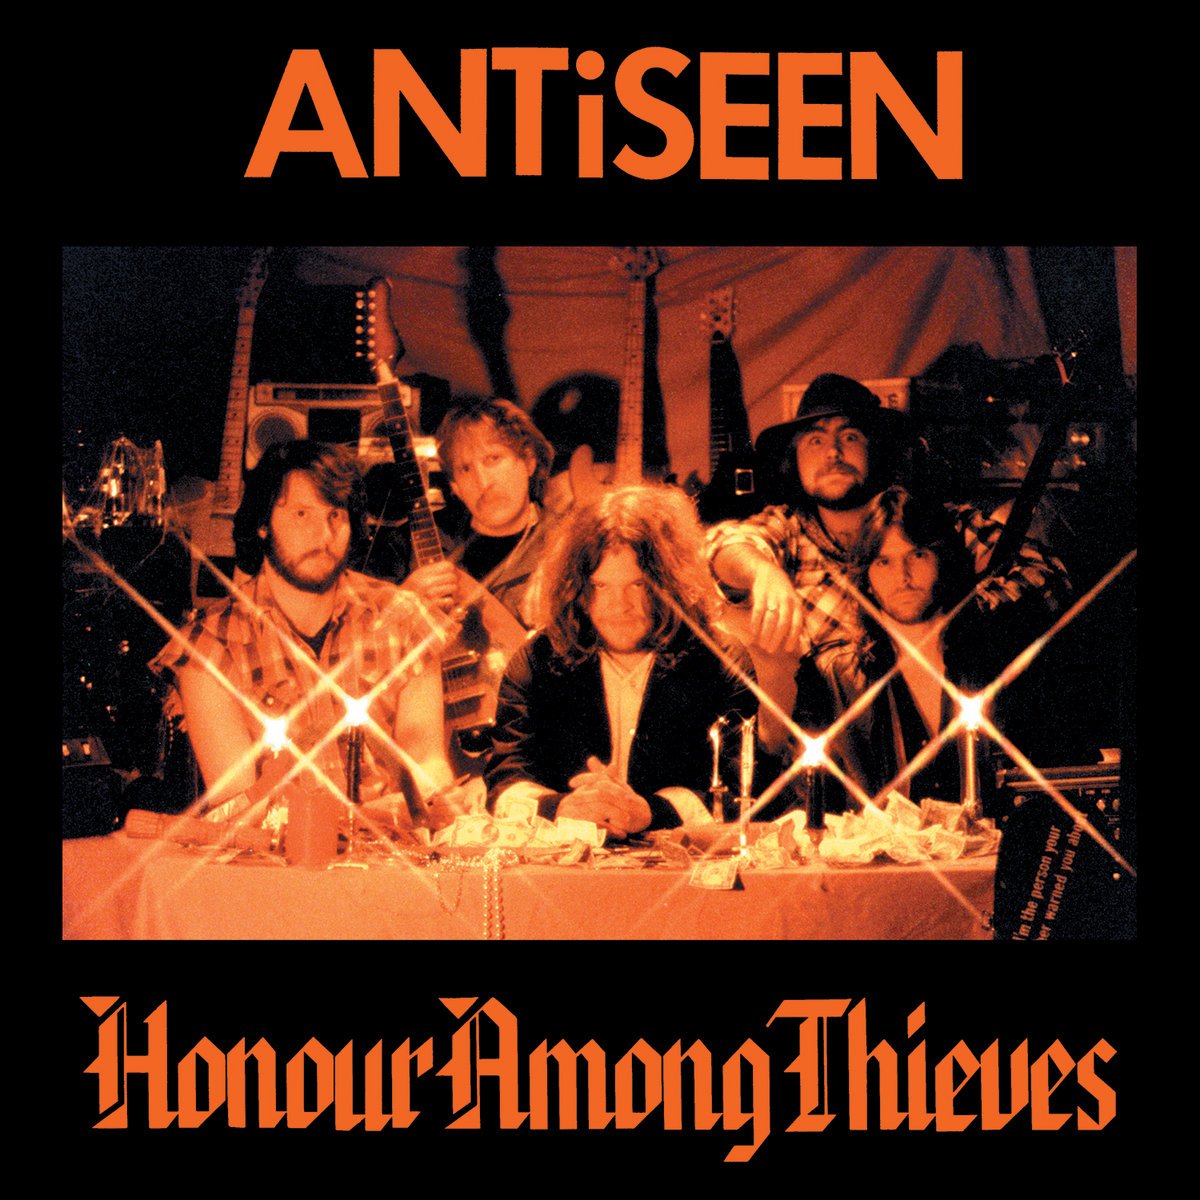 Antiseen-Honour Among Thieves-Reissue-16BIT-WEB-FLAC-2002-VEXED